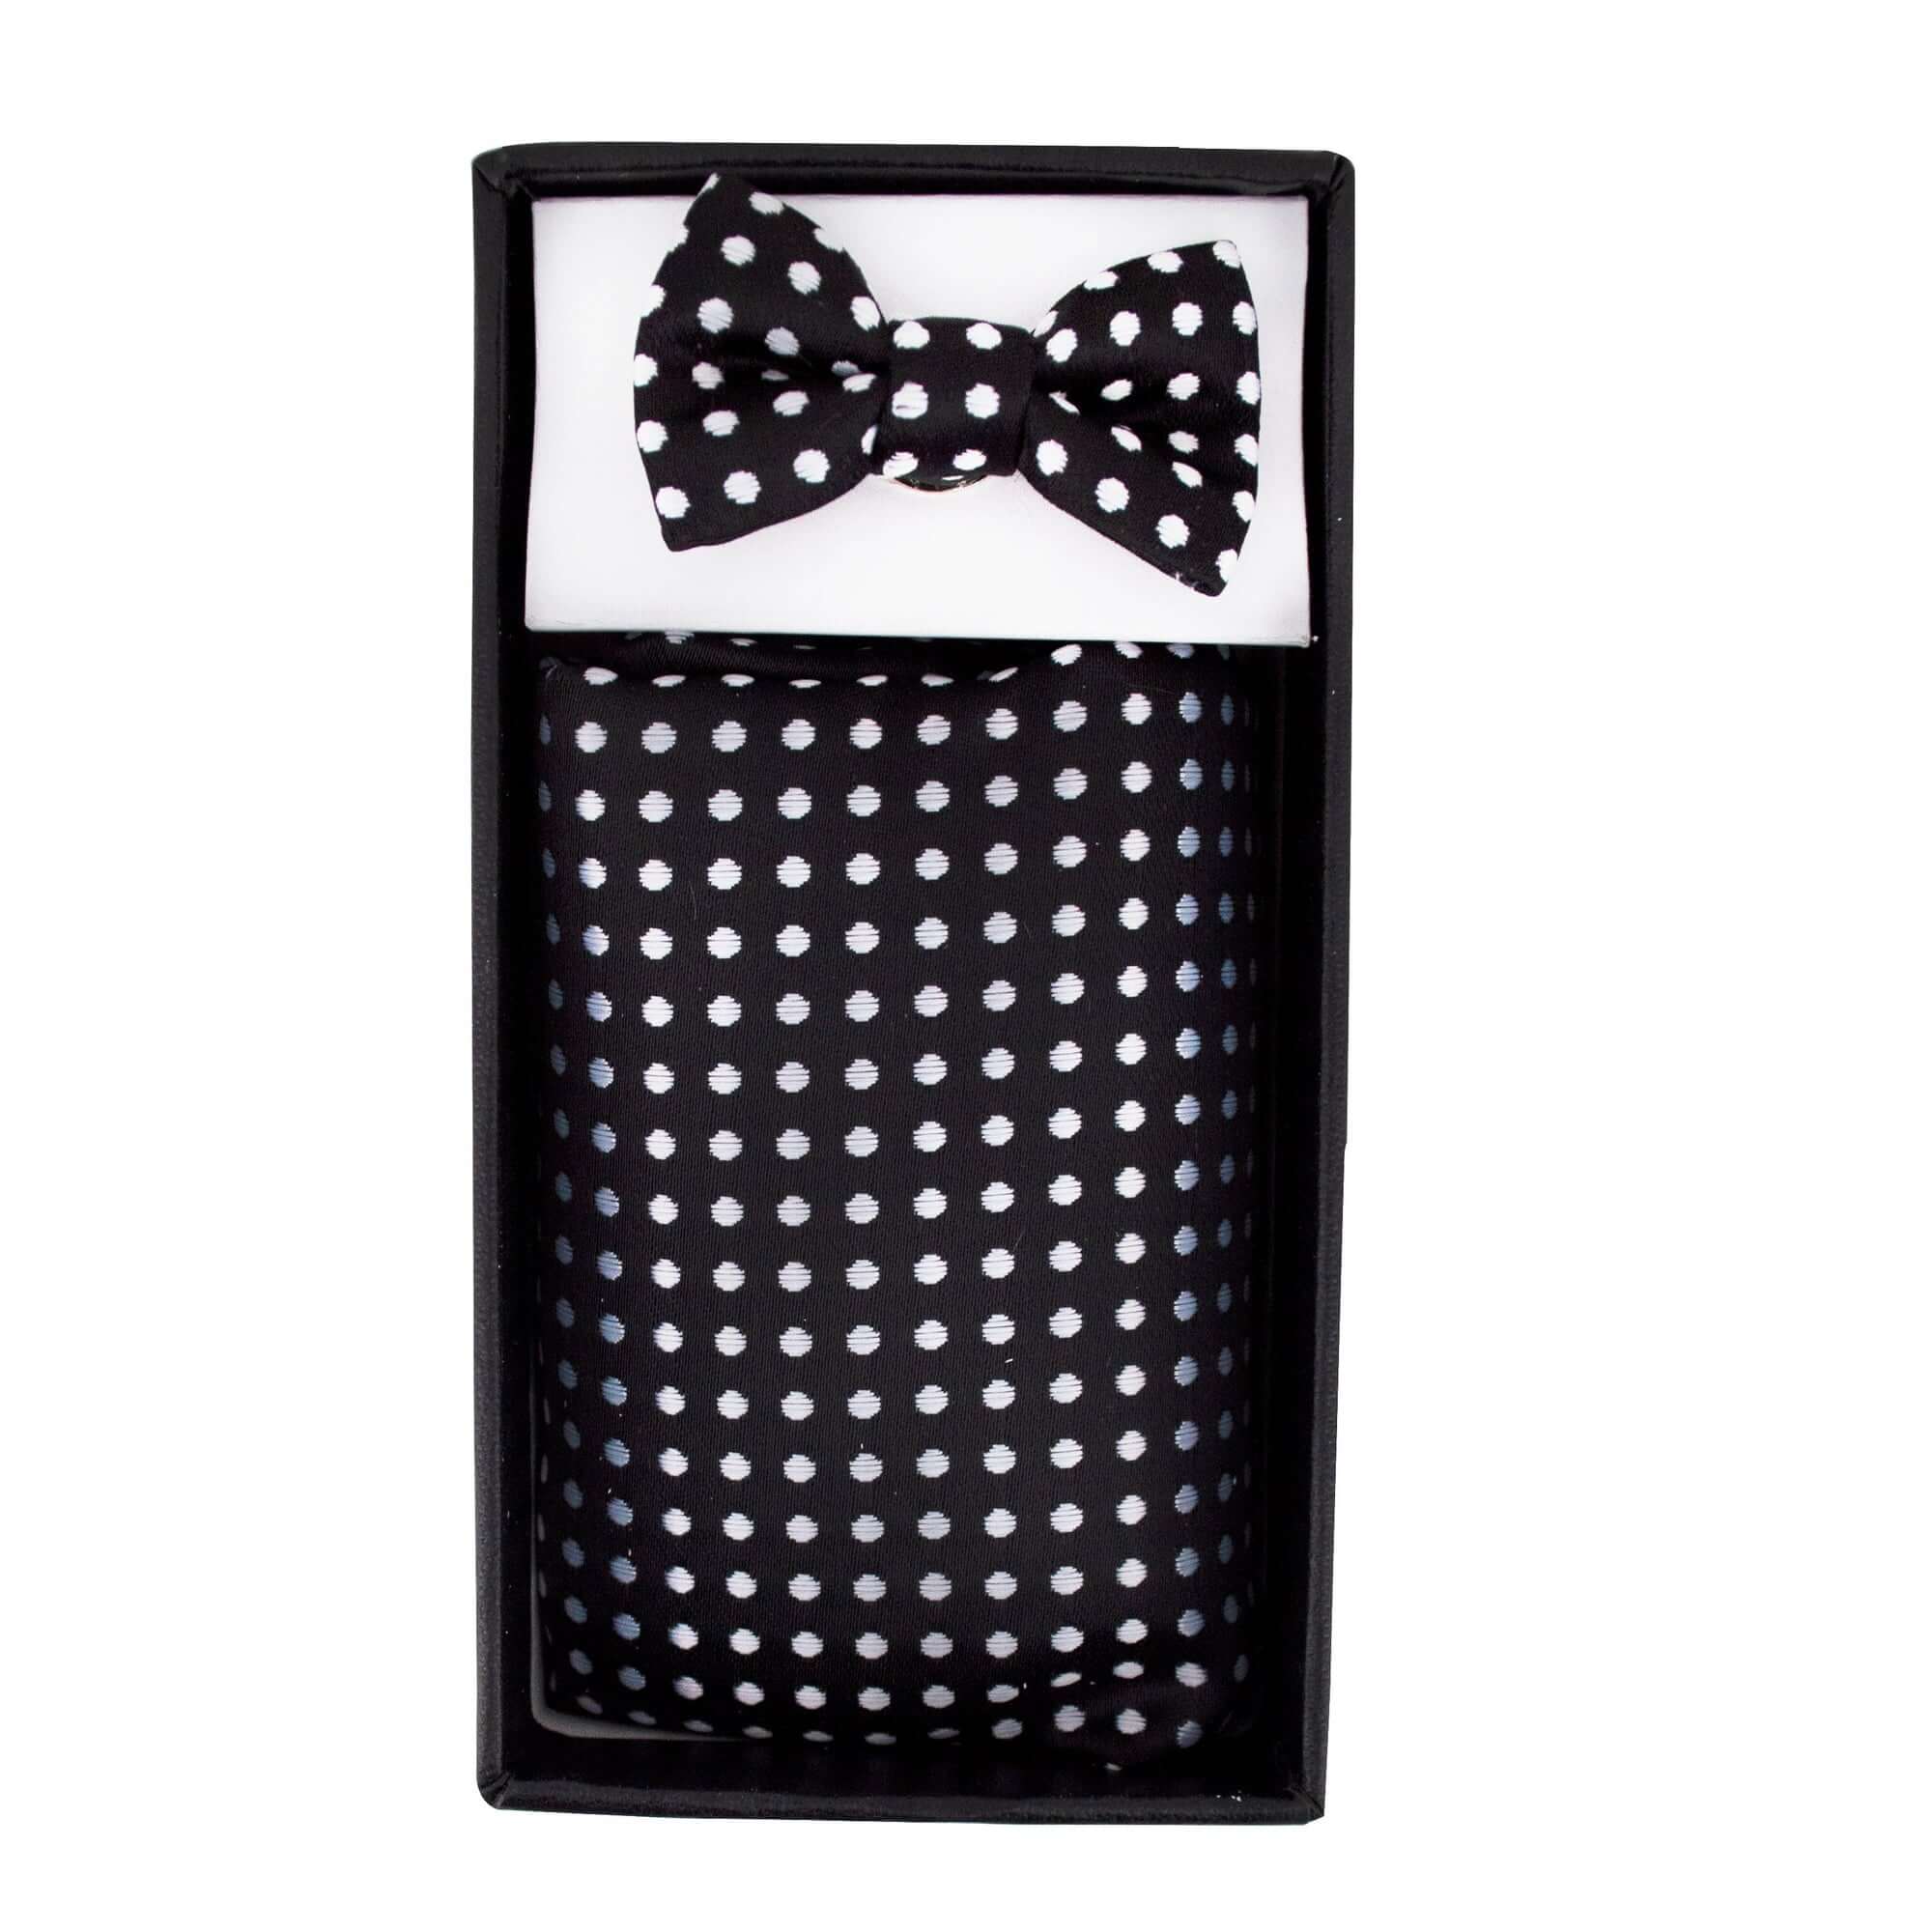 Bow Tie shaped Lapel Pin and Pocket Square Set in Black with White Polka Dot-Cufflinks.com.sg | Neckties.com.sg